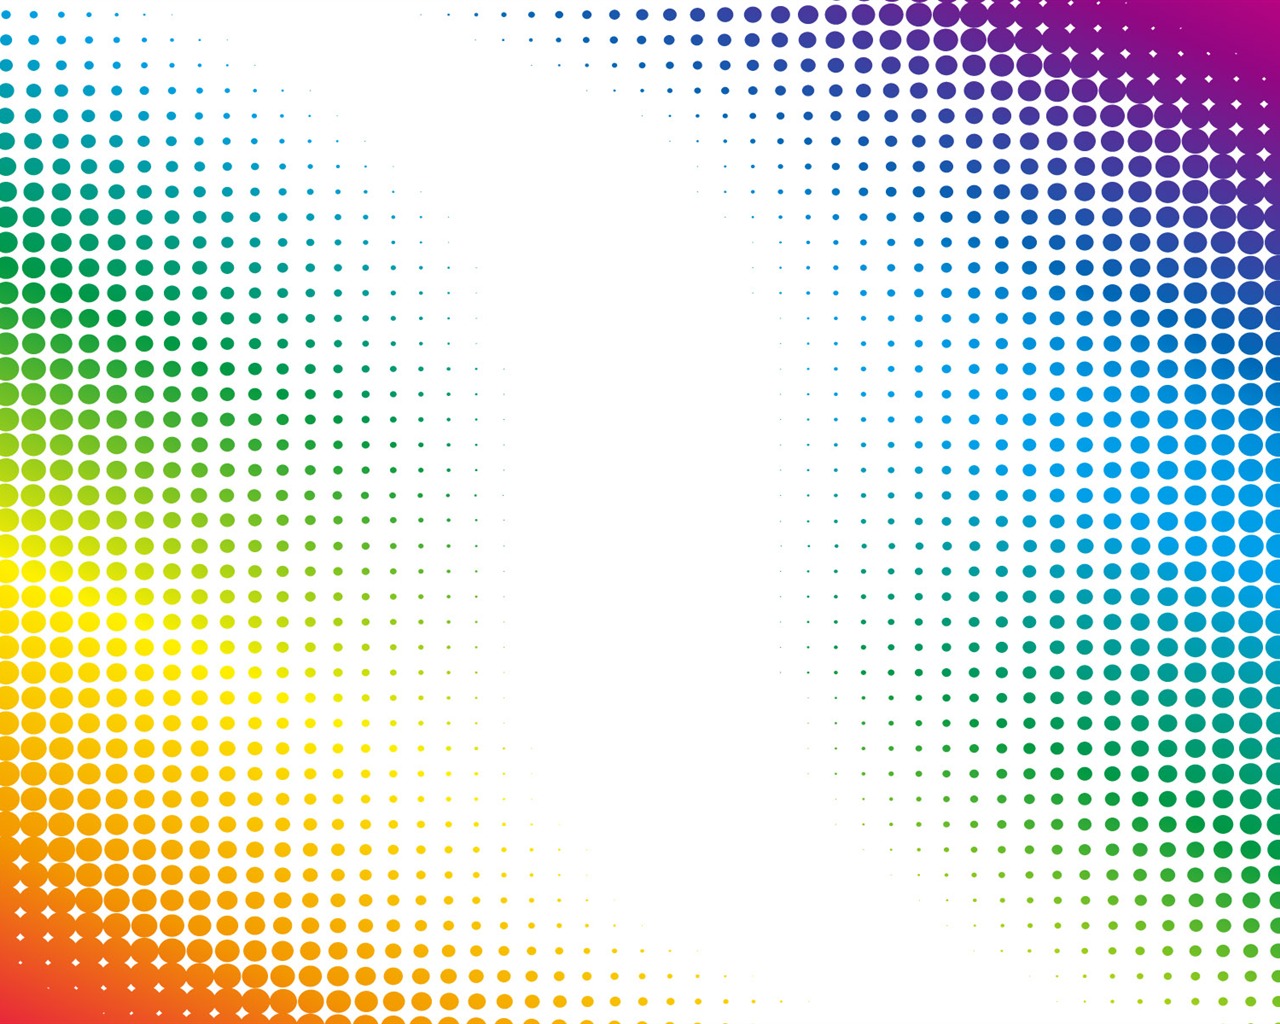 Colorful vector background wallpaper (1) #6 - 1280x1024